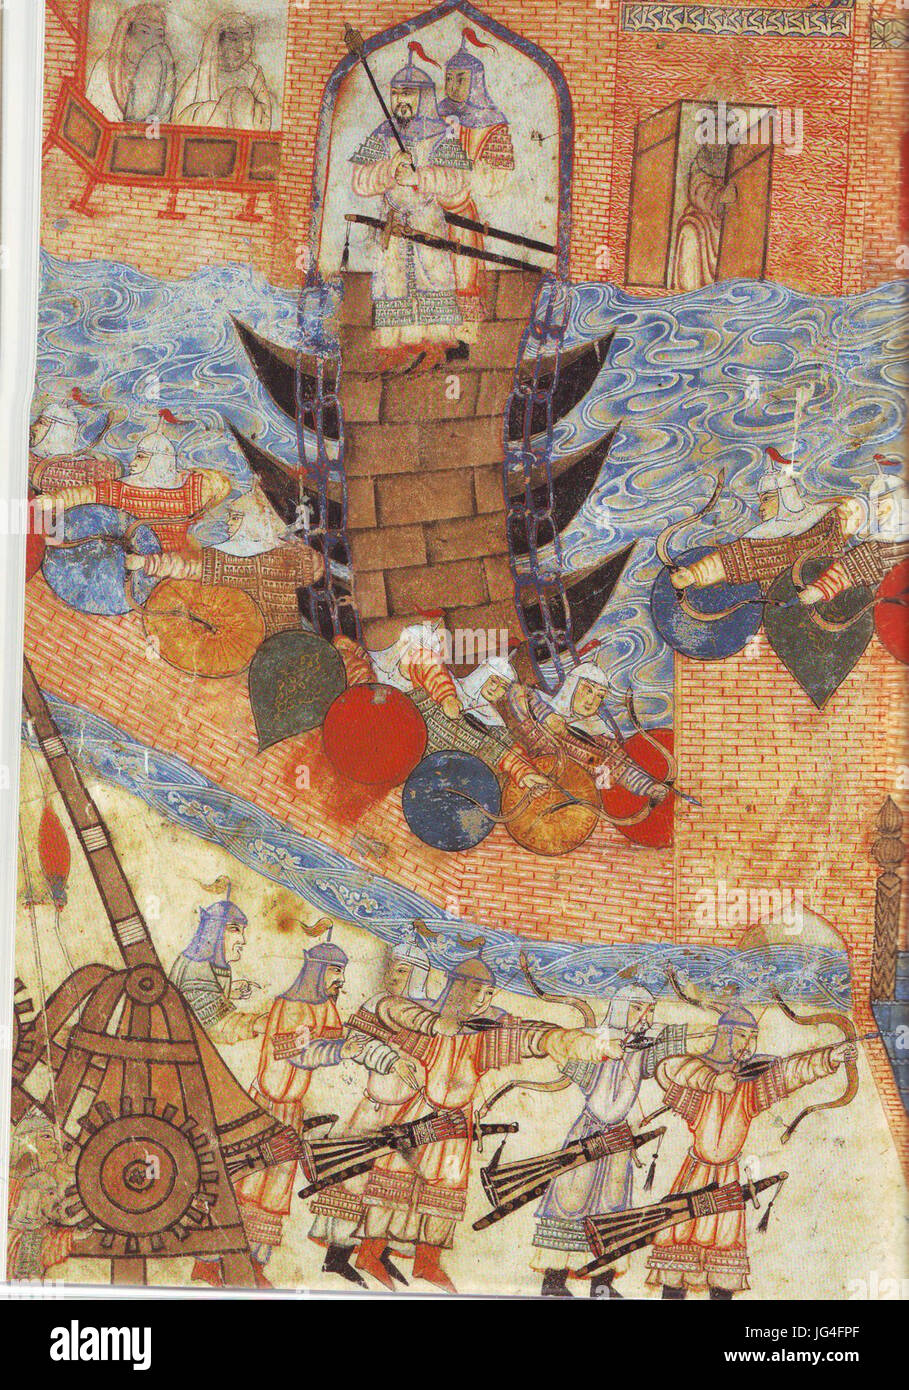 Persian painting of Hülegü s army attacking city with siege engine Stock Photo